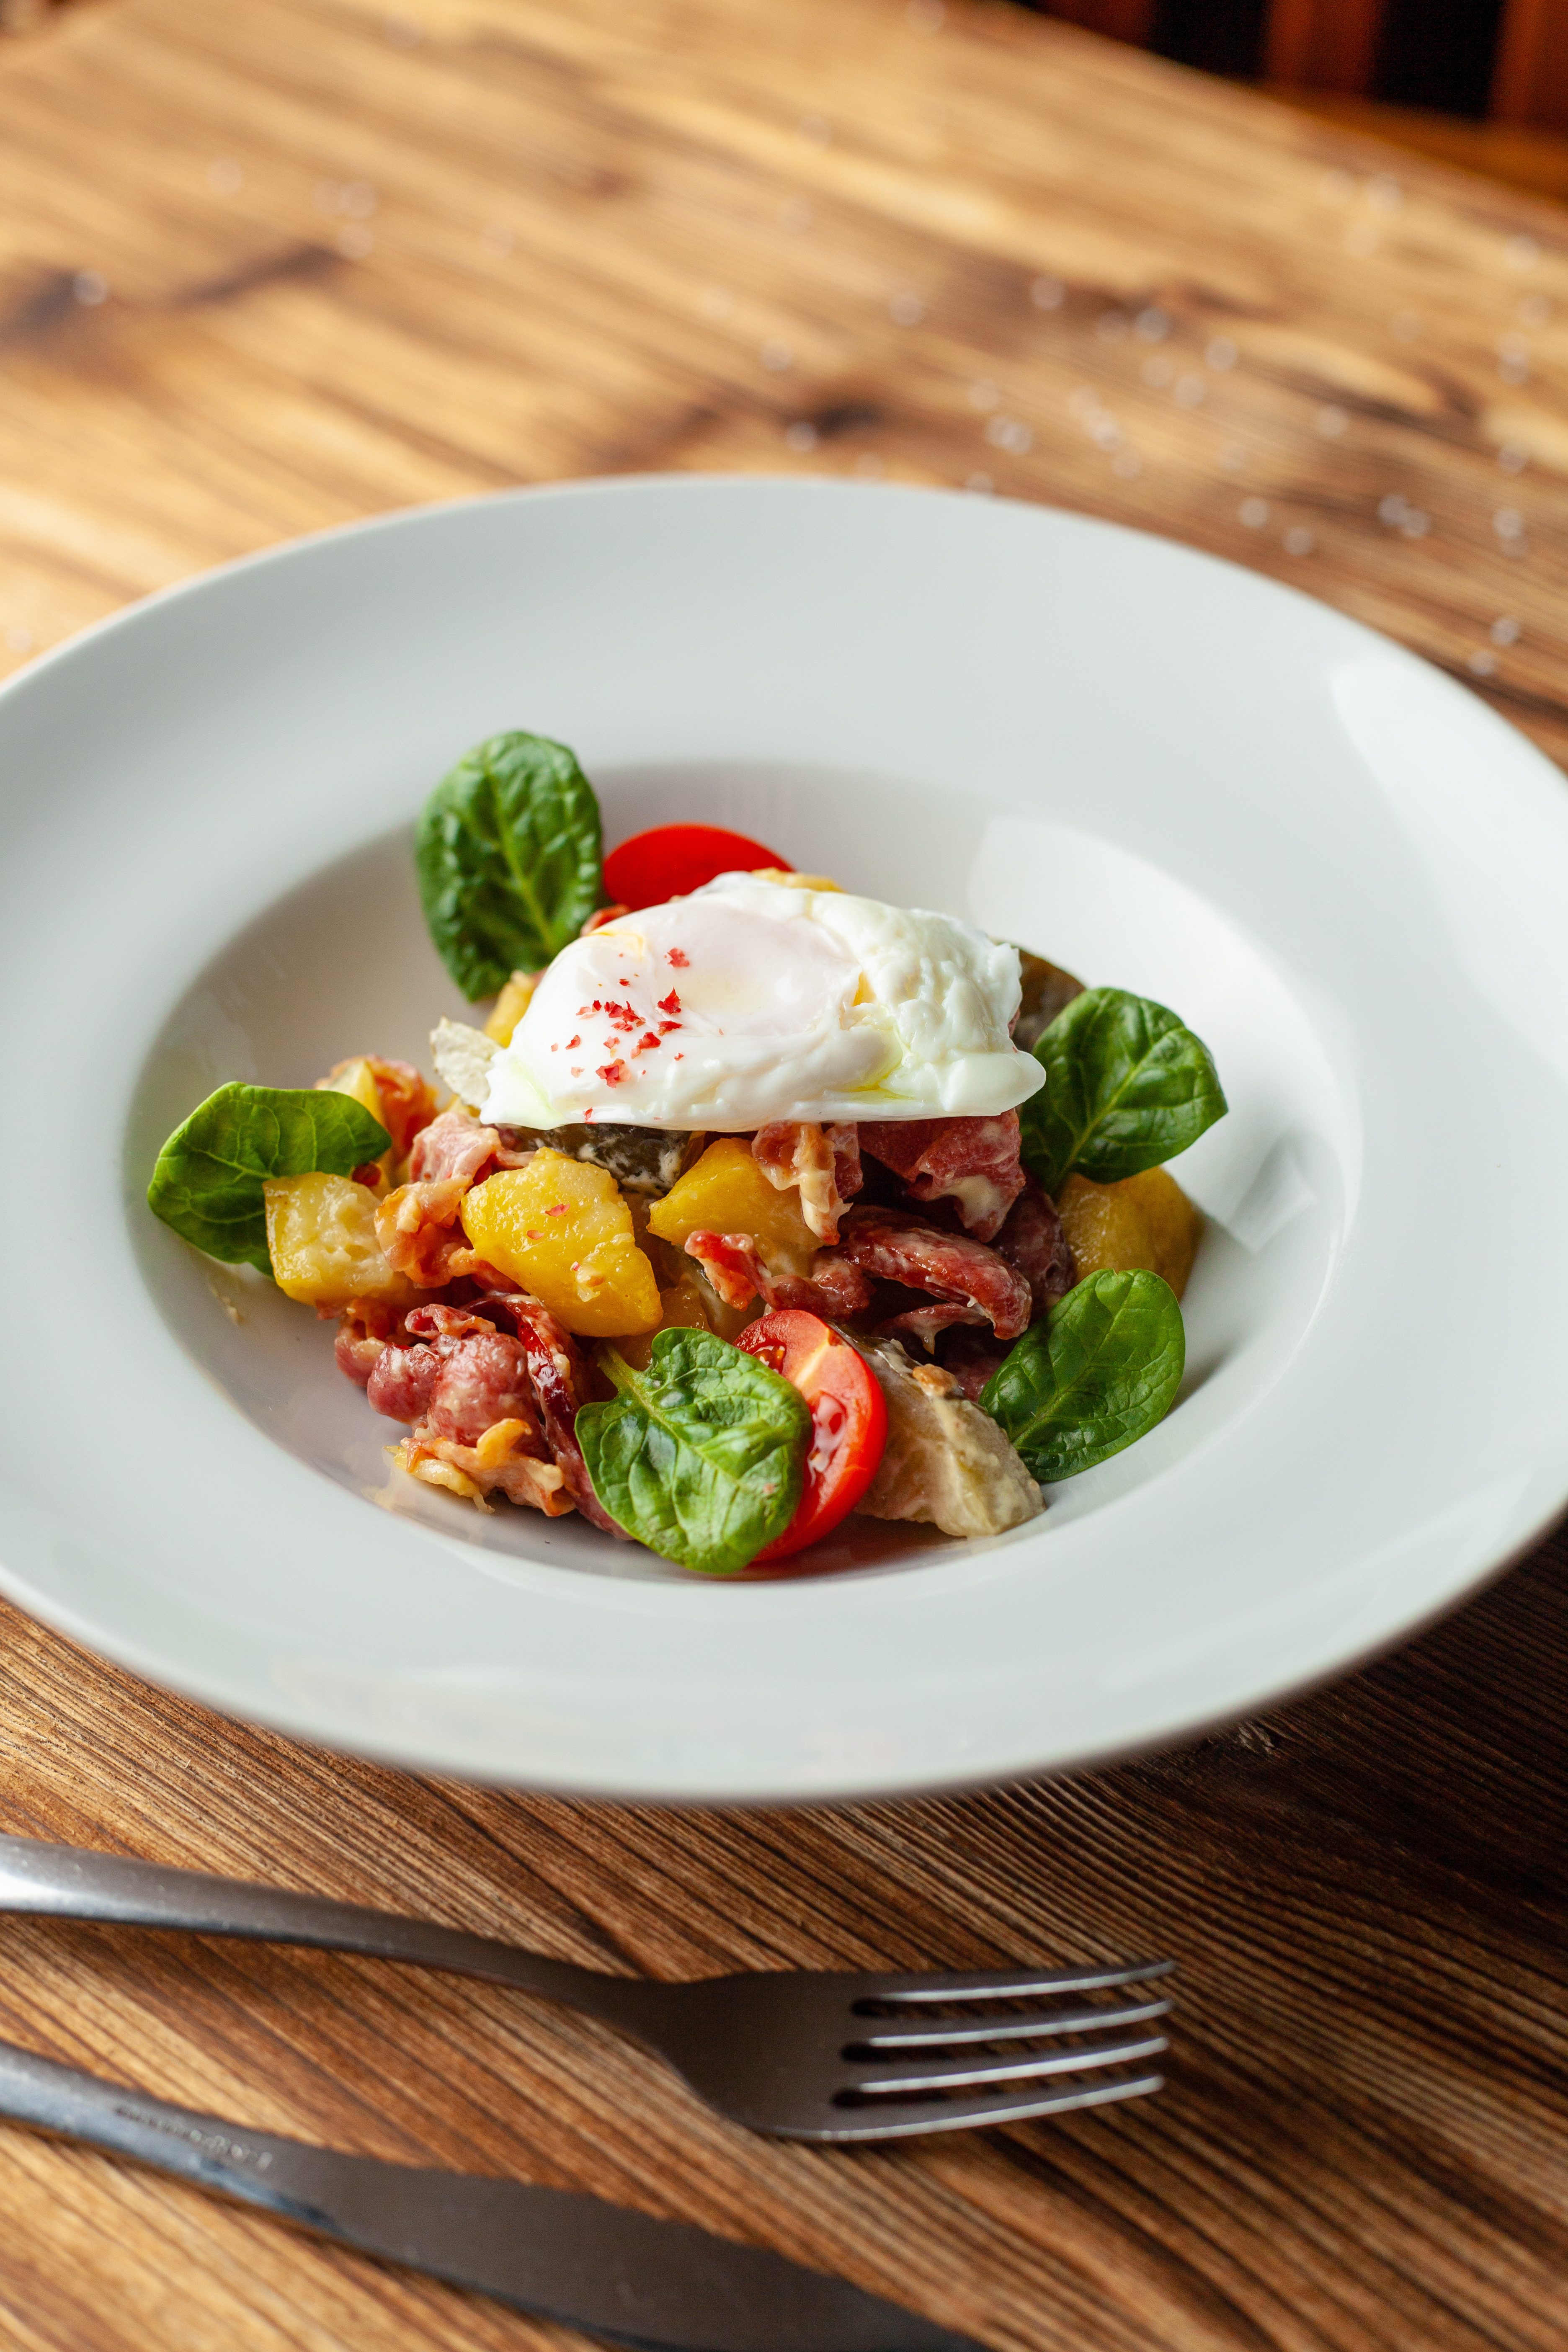 Rustic salad with, tomatoes, chorizo sausage, poached egg, spinach, potato and pickled cucumber for nutritious dinner, served on wooden table